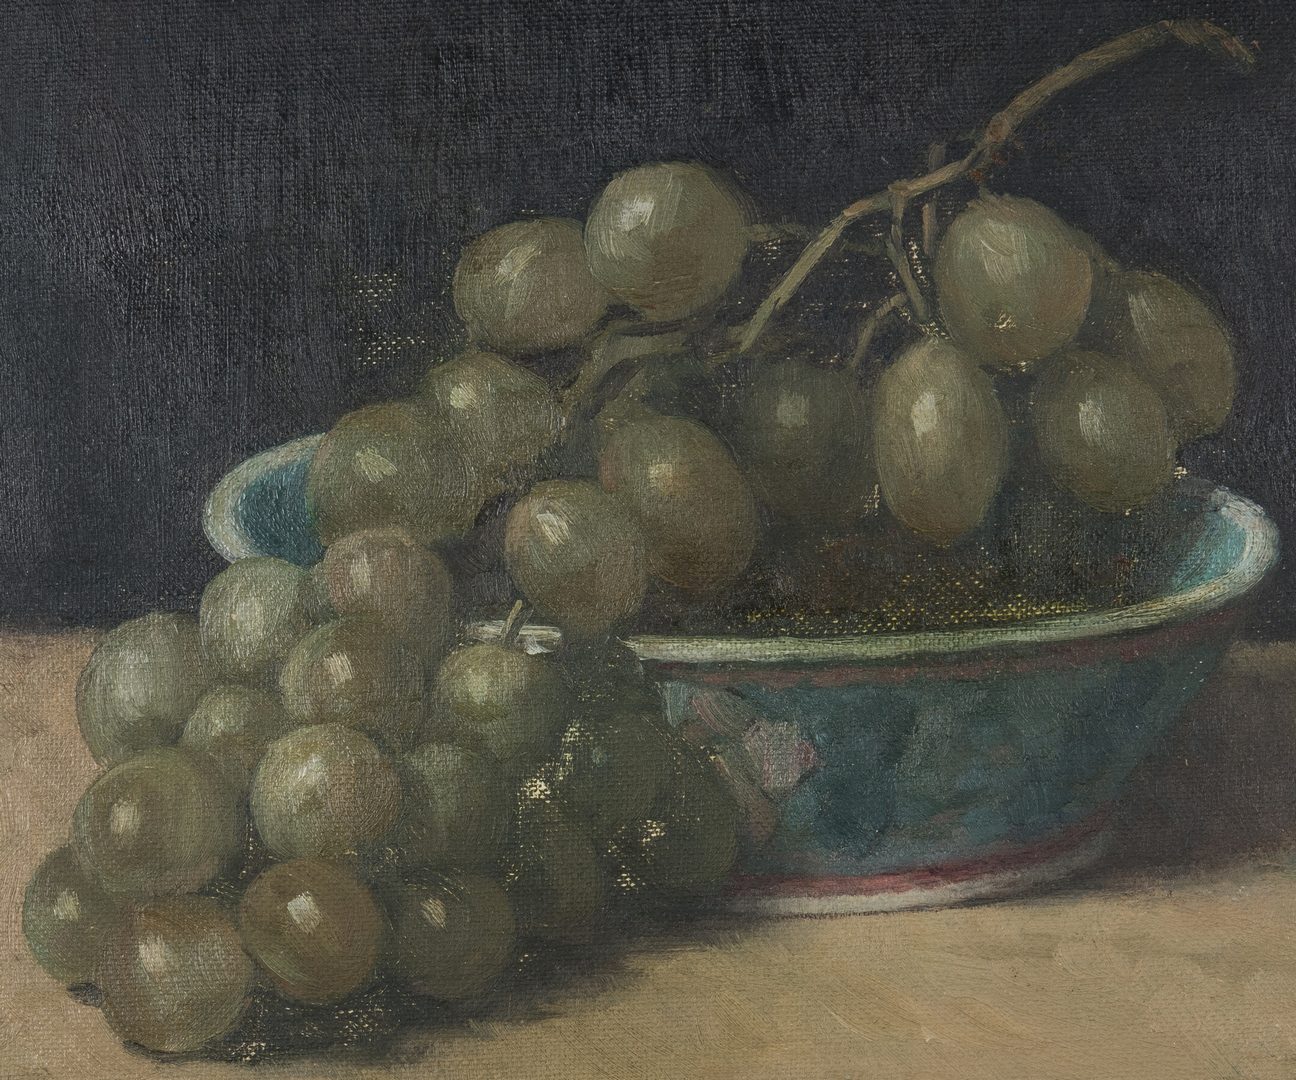 Lot 418: Landscape and Still Life by Cariani, Reeves